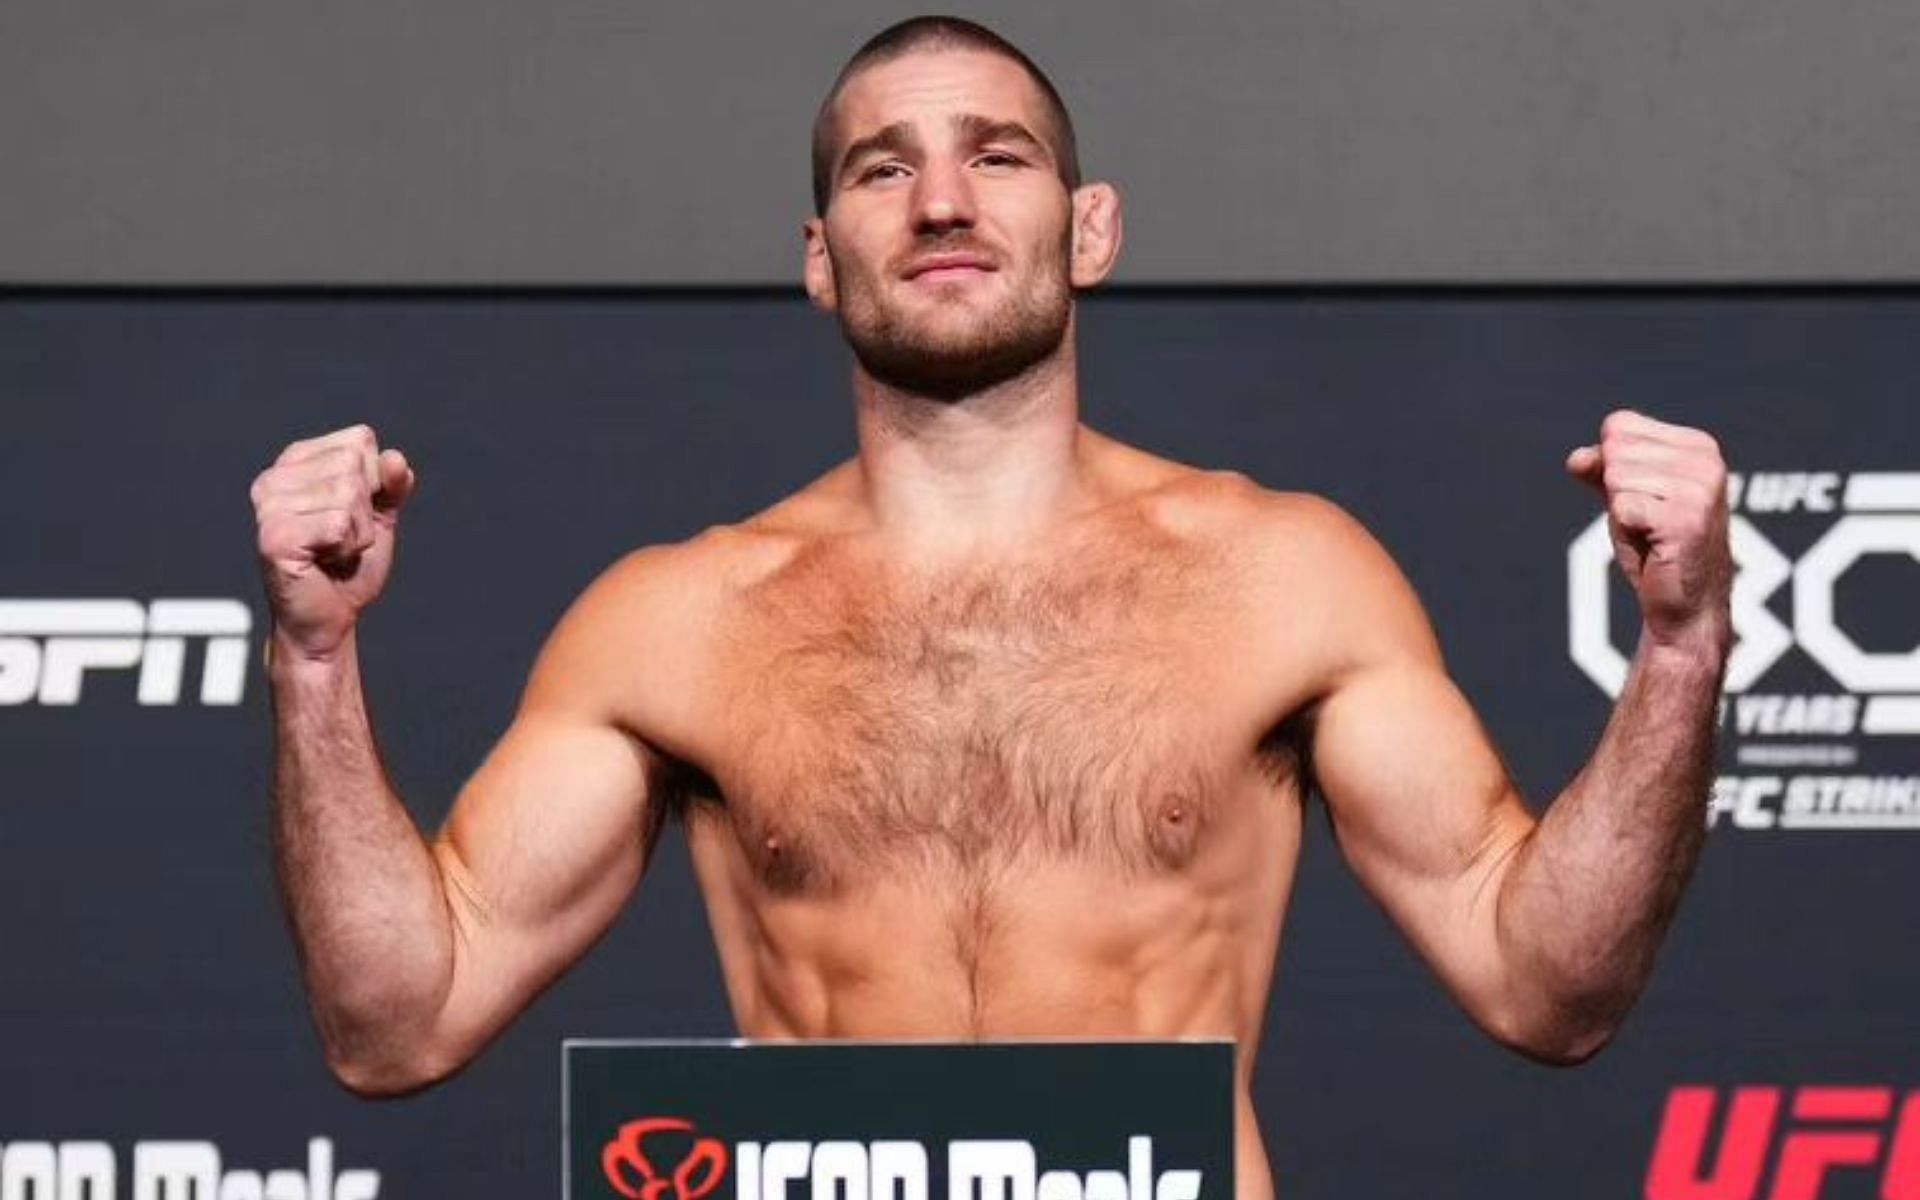 Will Sean Strickland become one of the UFC